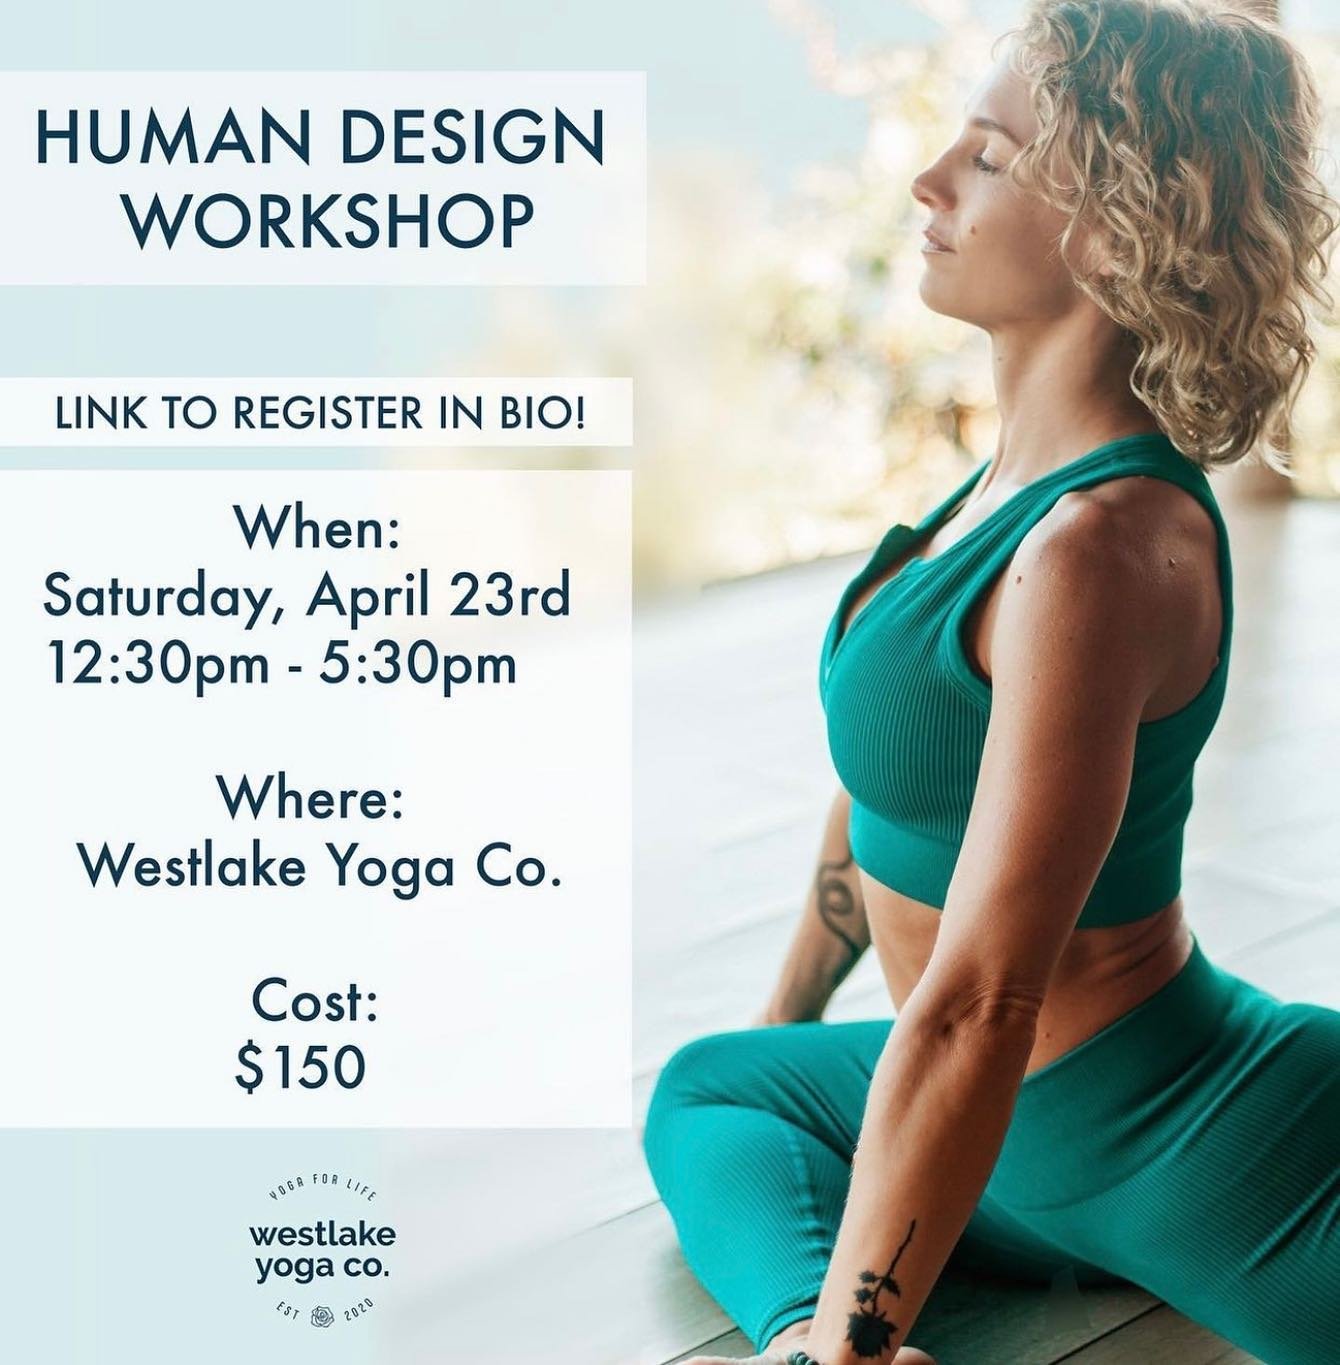 Some wonderful news for your Wednesday! @asanista will be in Westlake Village California hosting a Human Design Live Workshop Saturday,
April 23rd from 12:30-5:30pm at @westlakeyoga_co
and would love to see your faces!
In this informative 5 hour, in-